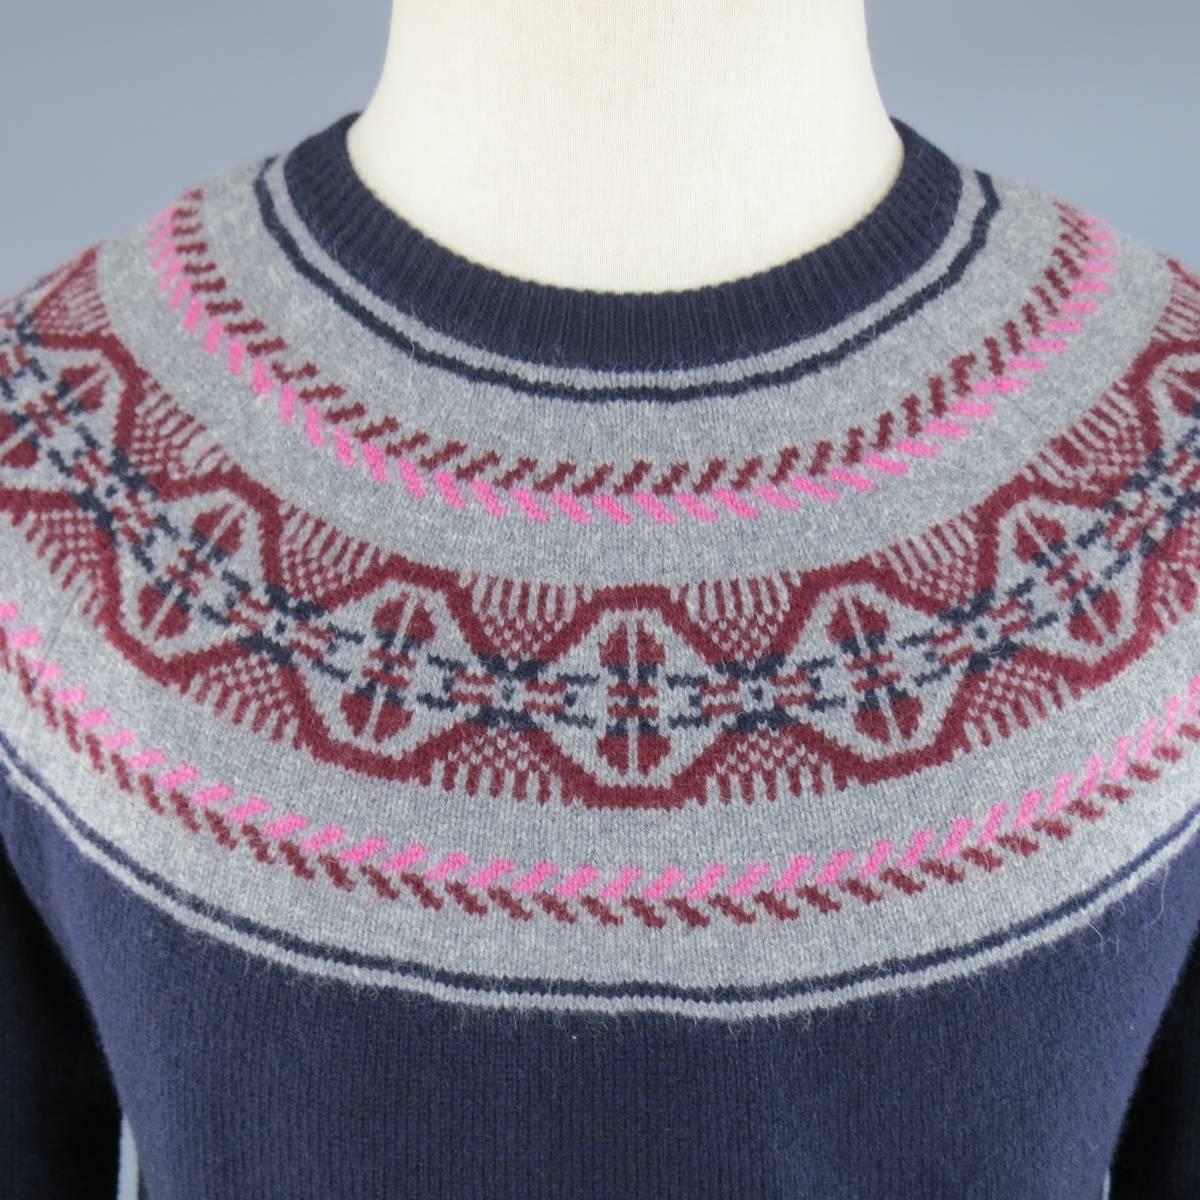 MICHAEL BASTIAN Sweater consists of wool blend material in a navy color tone. Designed in a crew-neck collar with rib cuffs and hem. Detailed fairisle pattern around the collar with pink, burgundy and grey color tone. Made in Italy.
 
Excellent